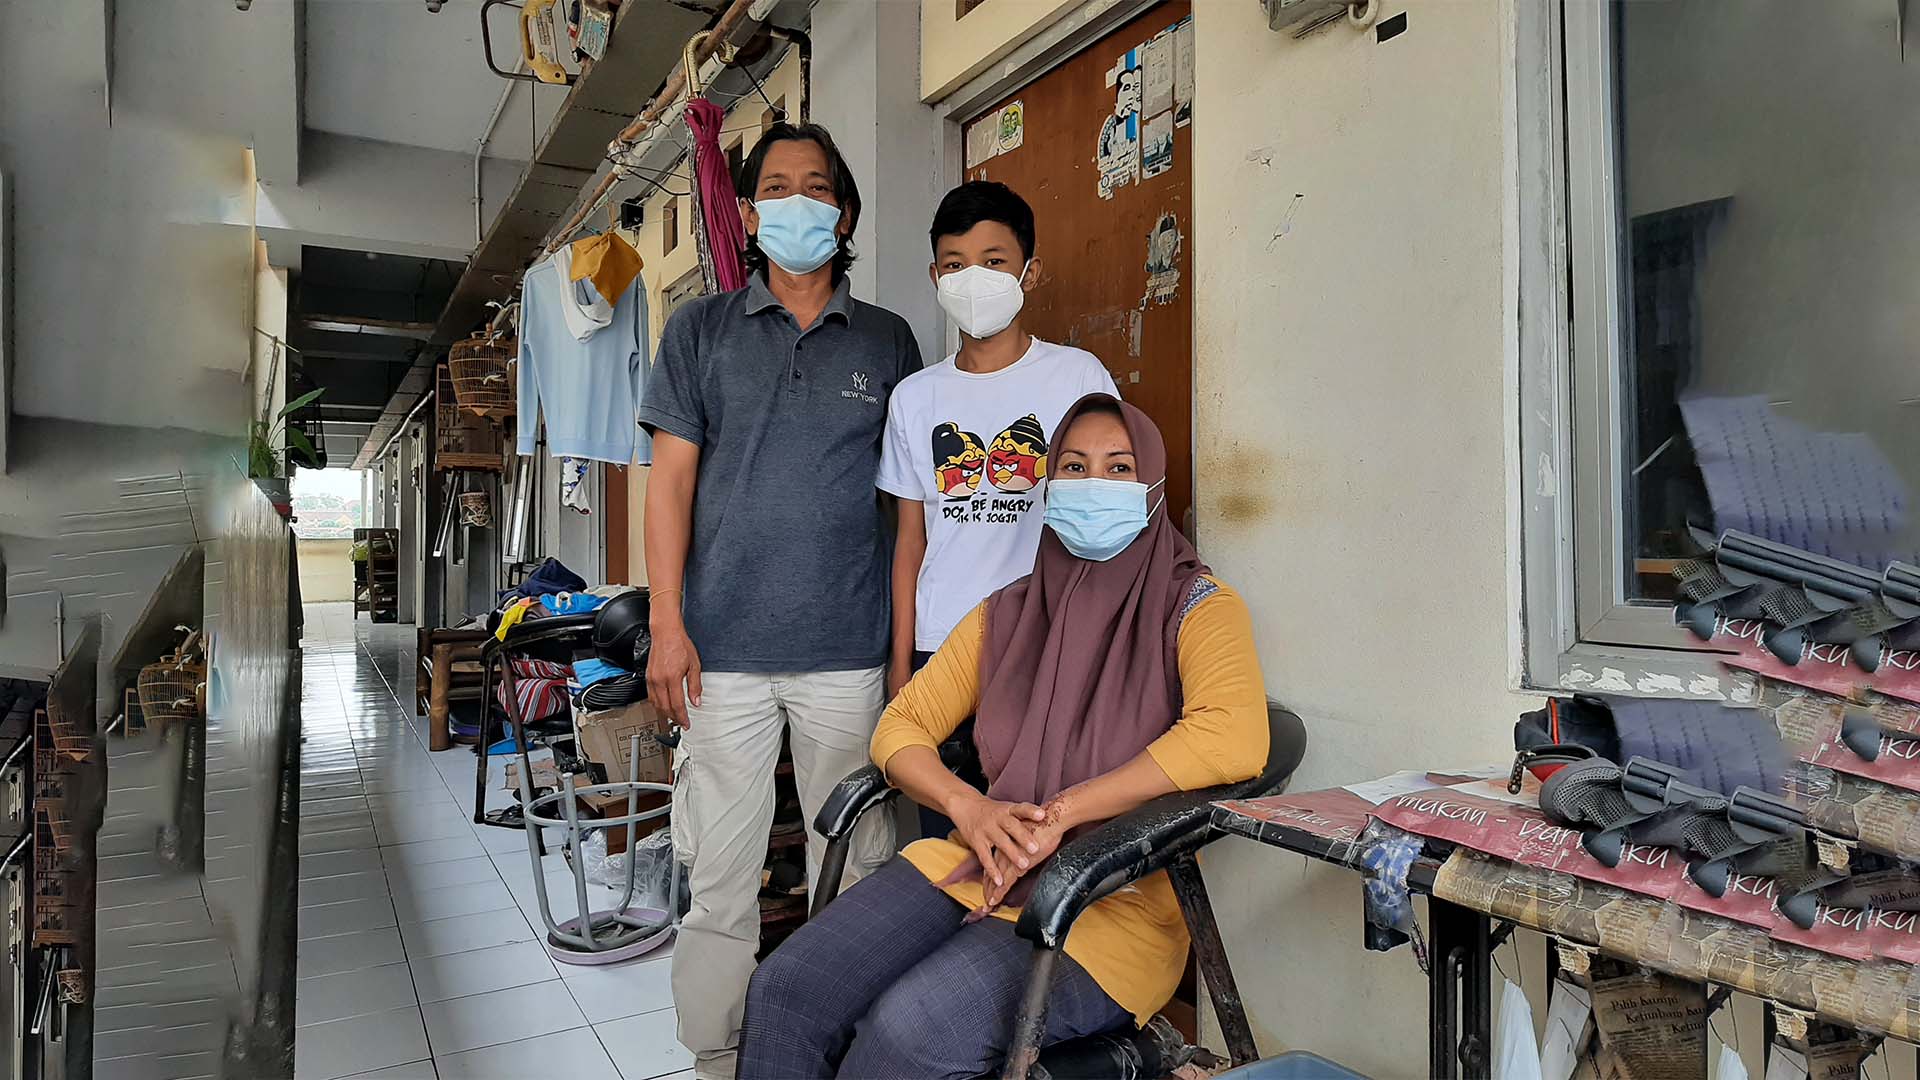 Schroders Together with Habitat Indonesia Bring Hope to Surabaya Health Workers and the Jogoyudan Community during the Covid-19 Pandemic